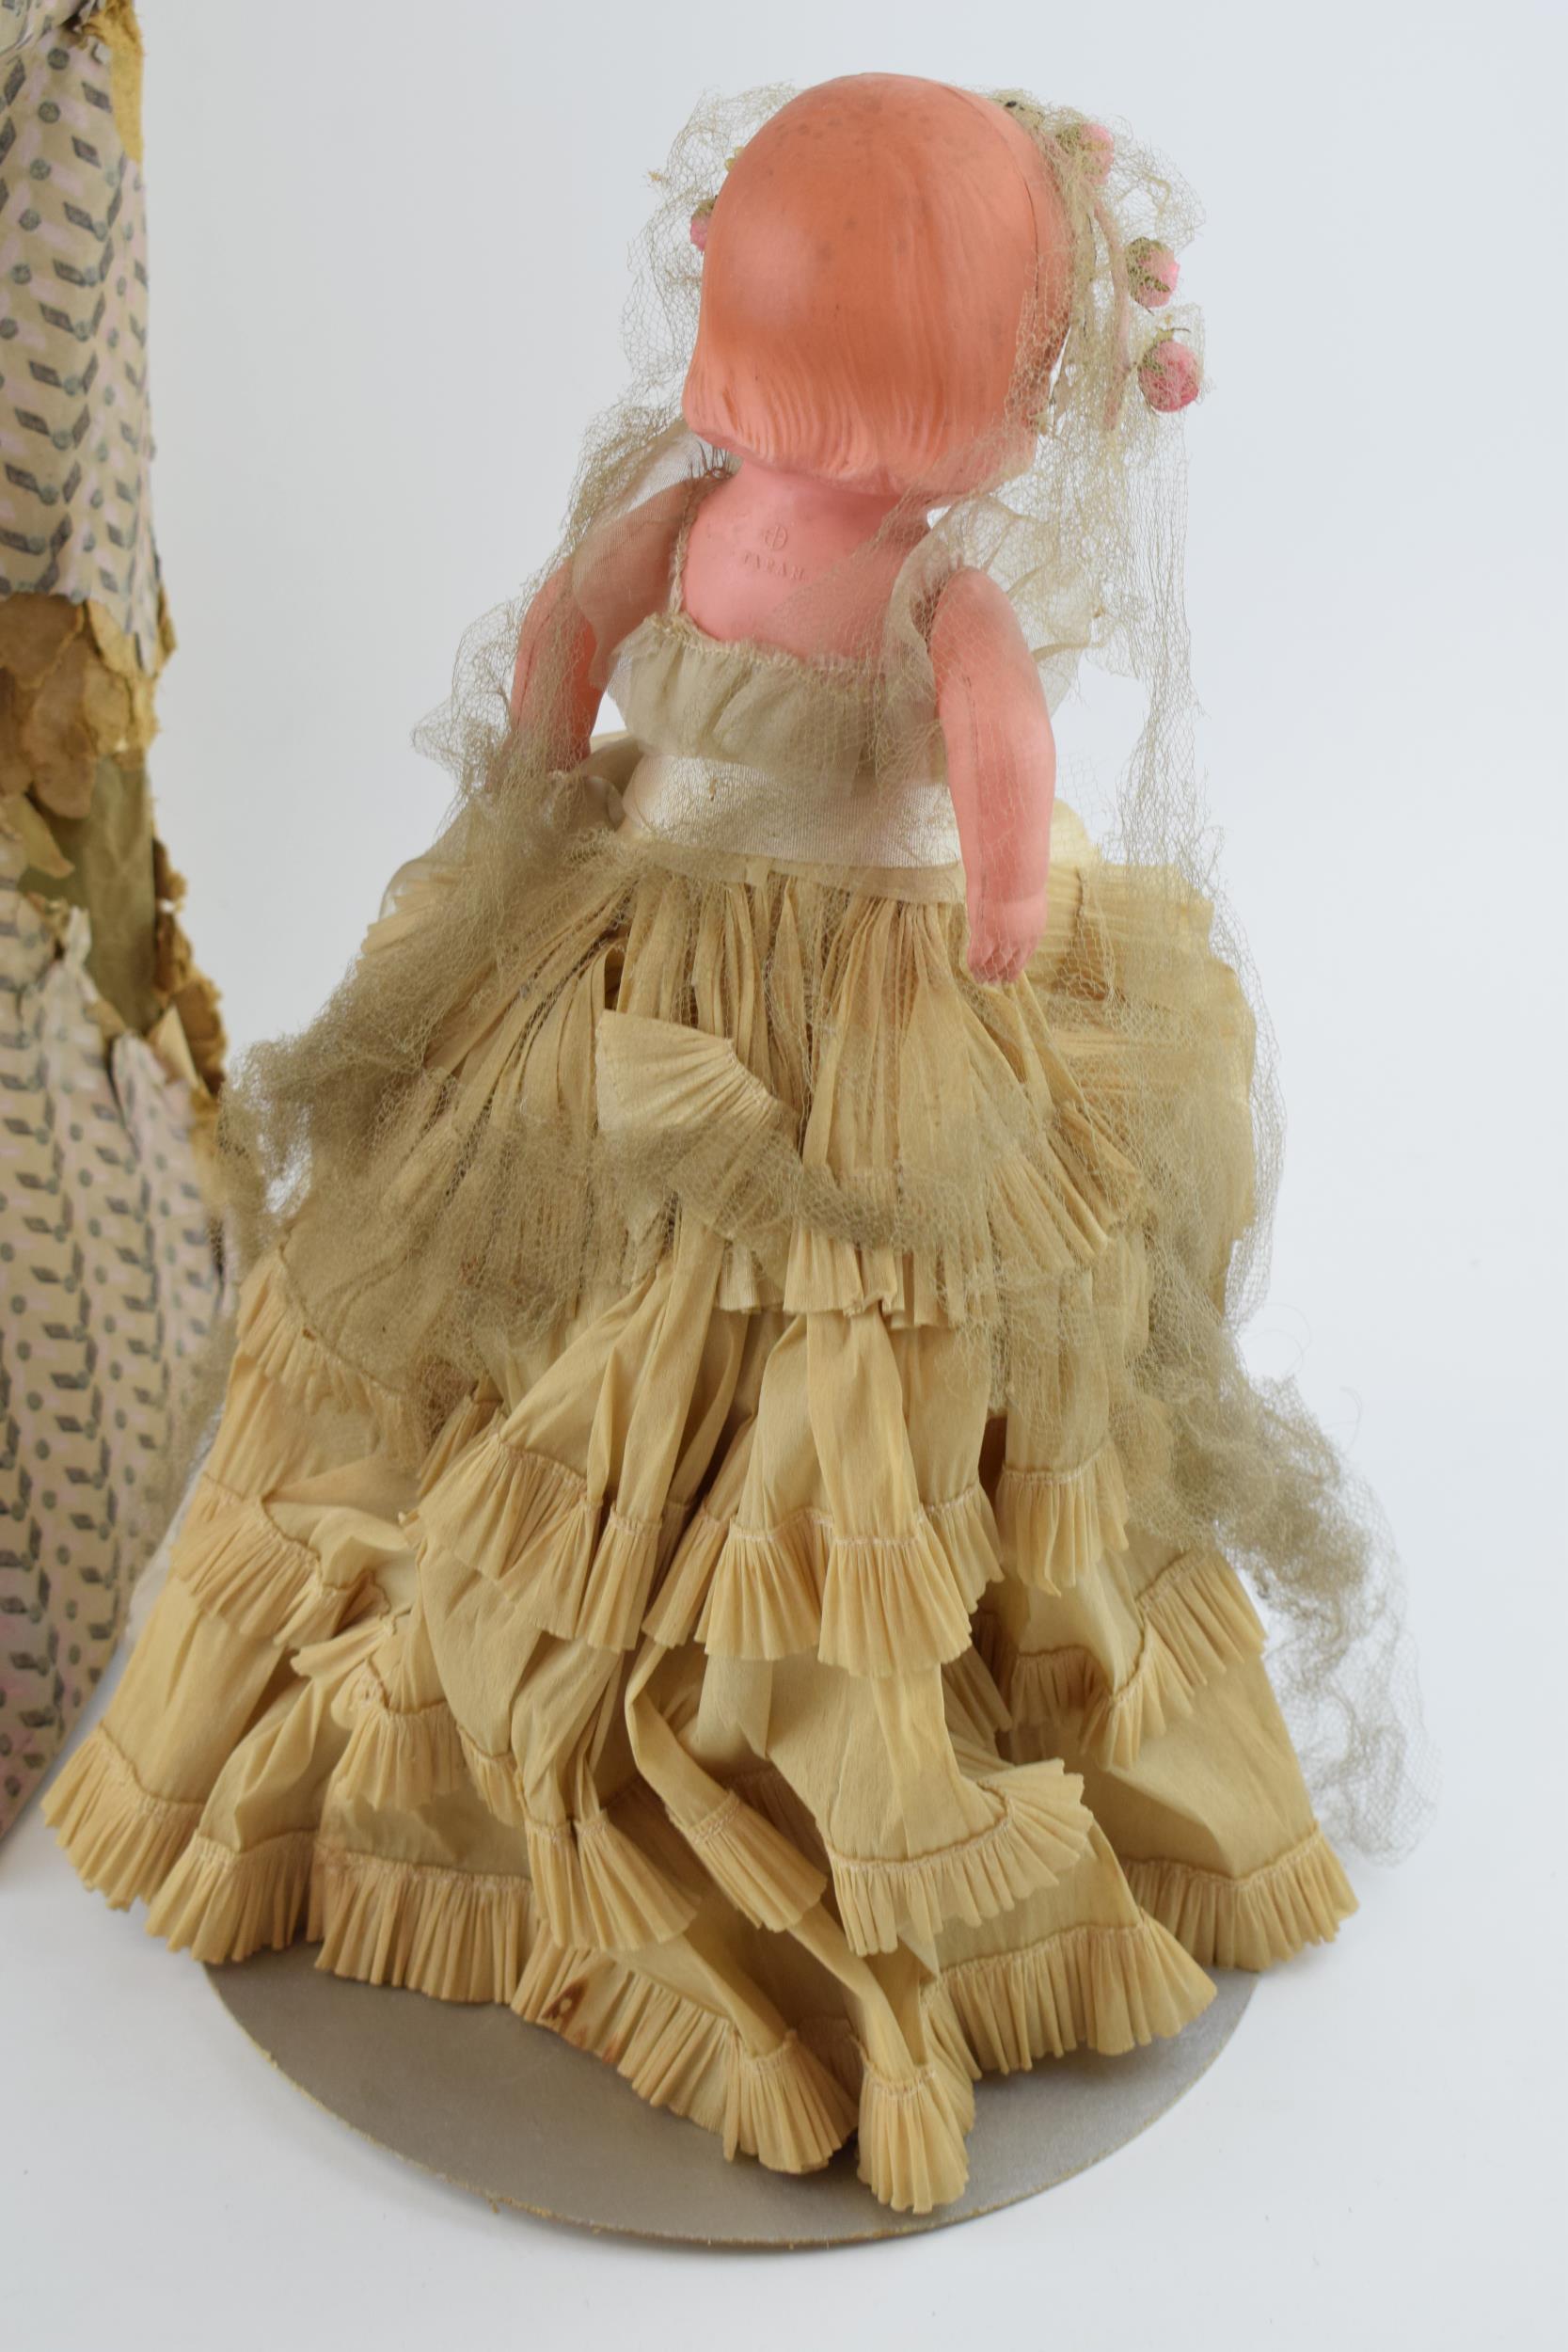 Boxed doll with paper dress, made in England, 'Pomeranian'. Height 40cm. Doll has survived well. - Image 3 of 4